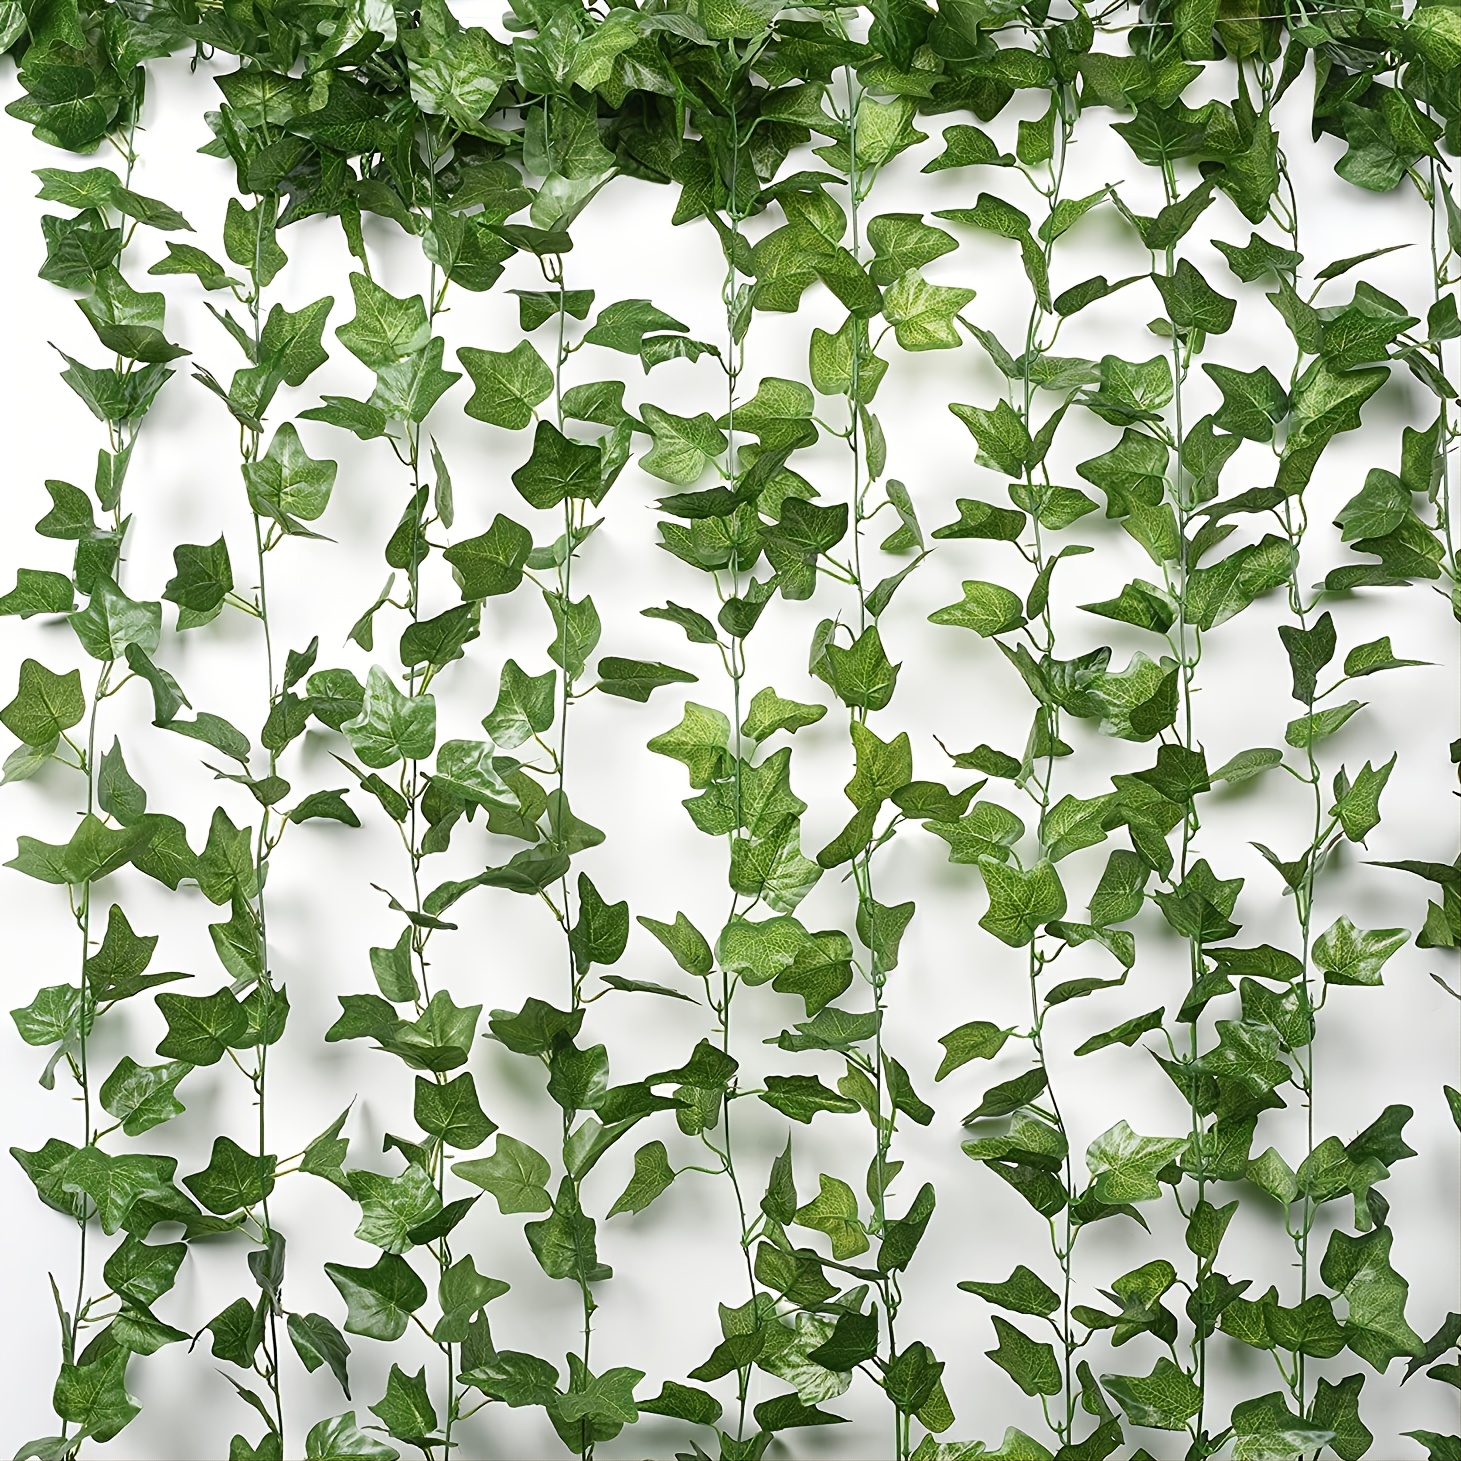 High Quality Artificial Ivy Leaves Hanging Leaves Fake Begonia Creepers  Leaves Faux Plant Greenery for Wedding Backdrop Wall Decor 